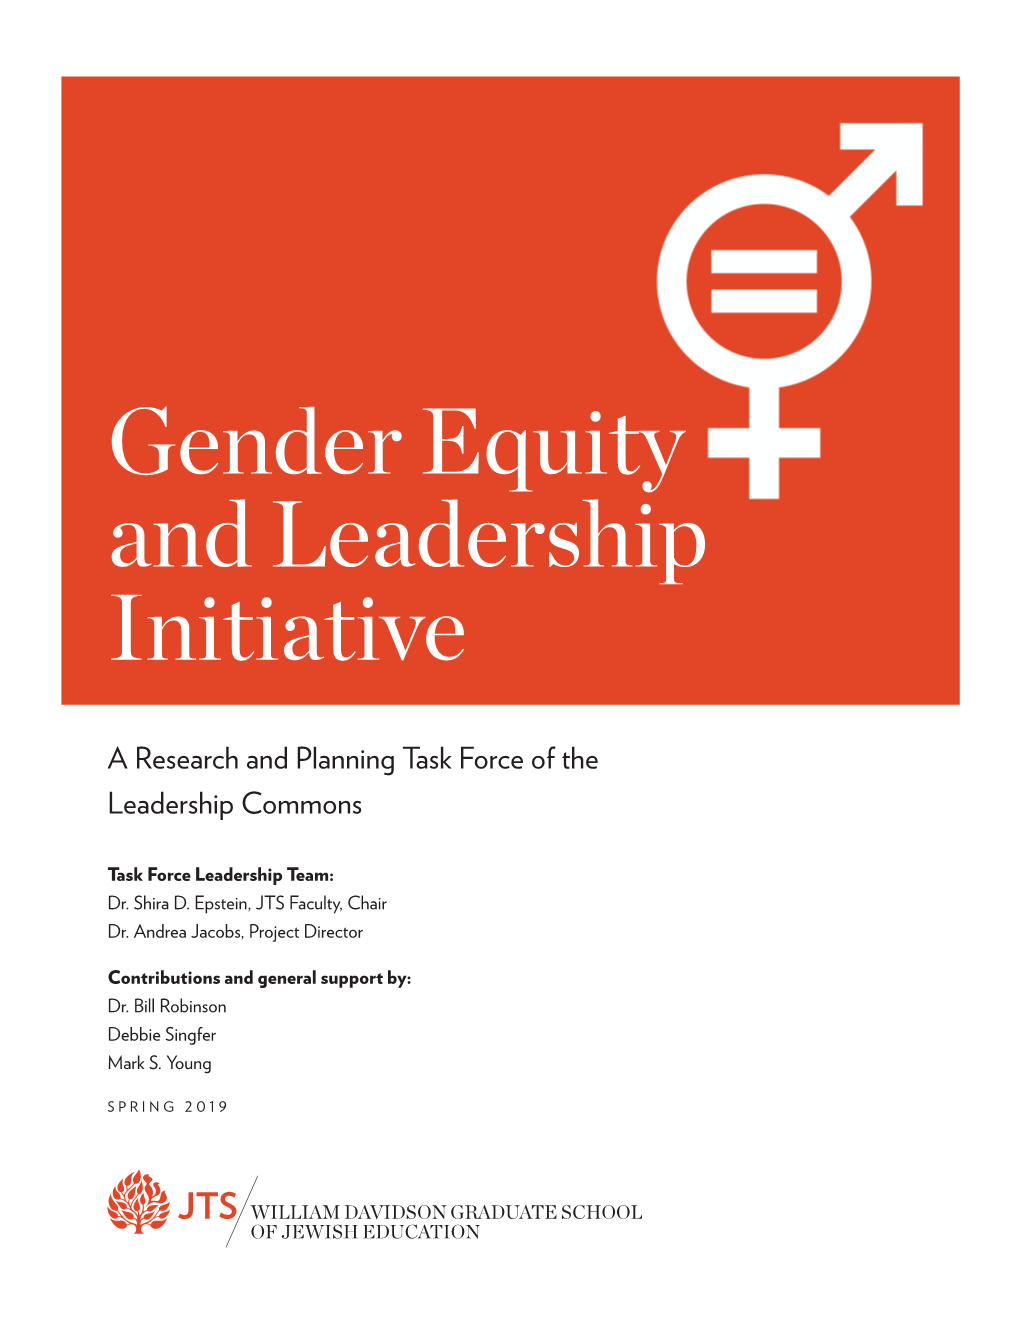 Gender Equity and Leadership Initiative